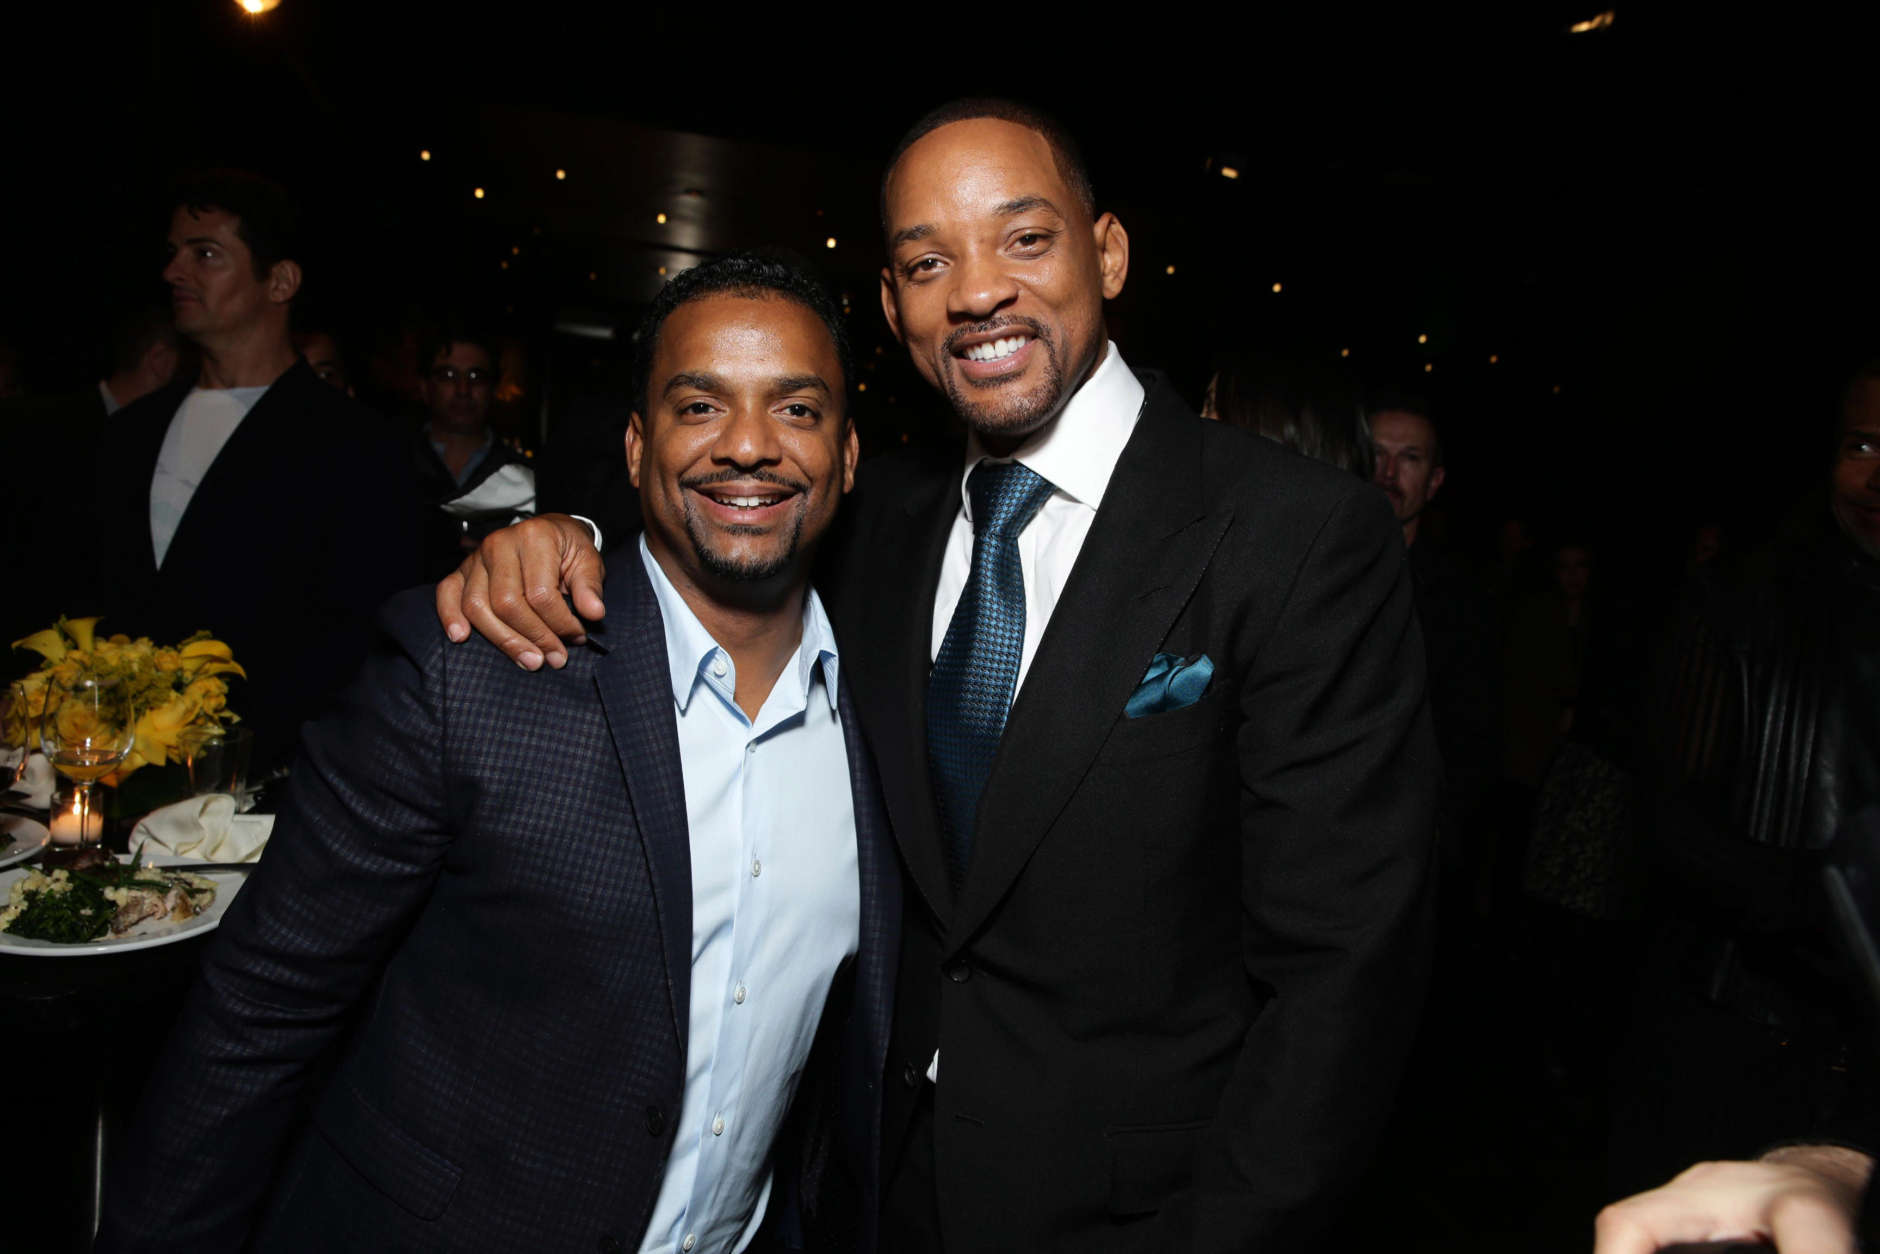 Alfonso Ribeiro and Will Smith seen at Columbia Pictures Special screening of 'Concussion' at Regency Village Theatre on Monday, Nov. 23, 2015, in Los Angeles, CA. (Photo by Eric Charbonneau/Invision for Sony Pictures/AP Images)